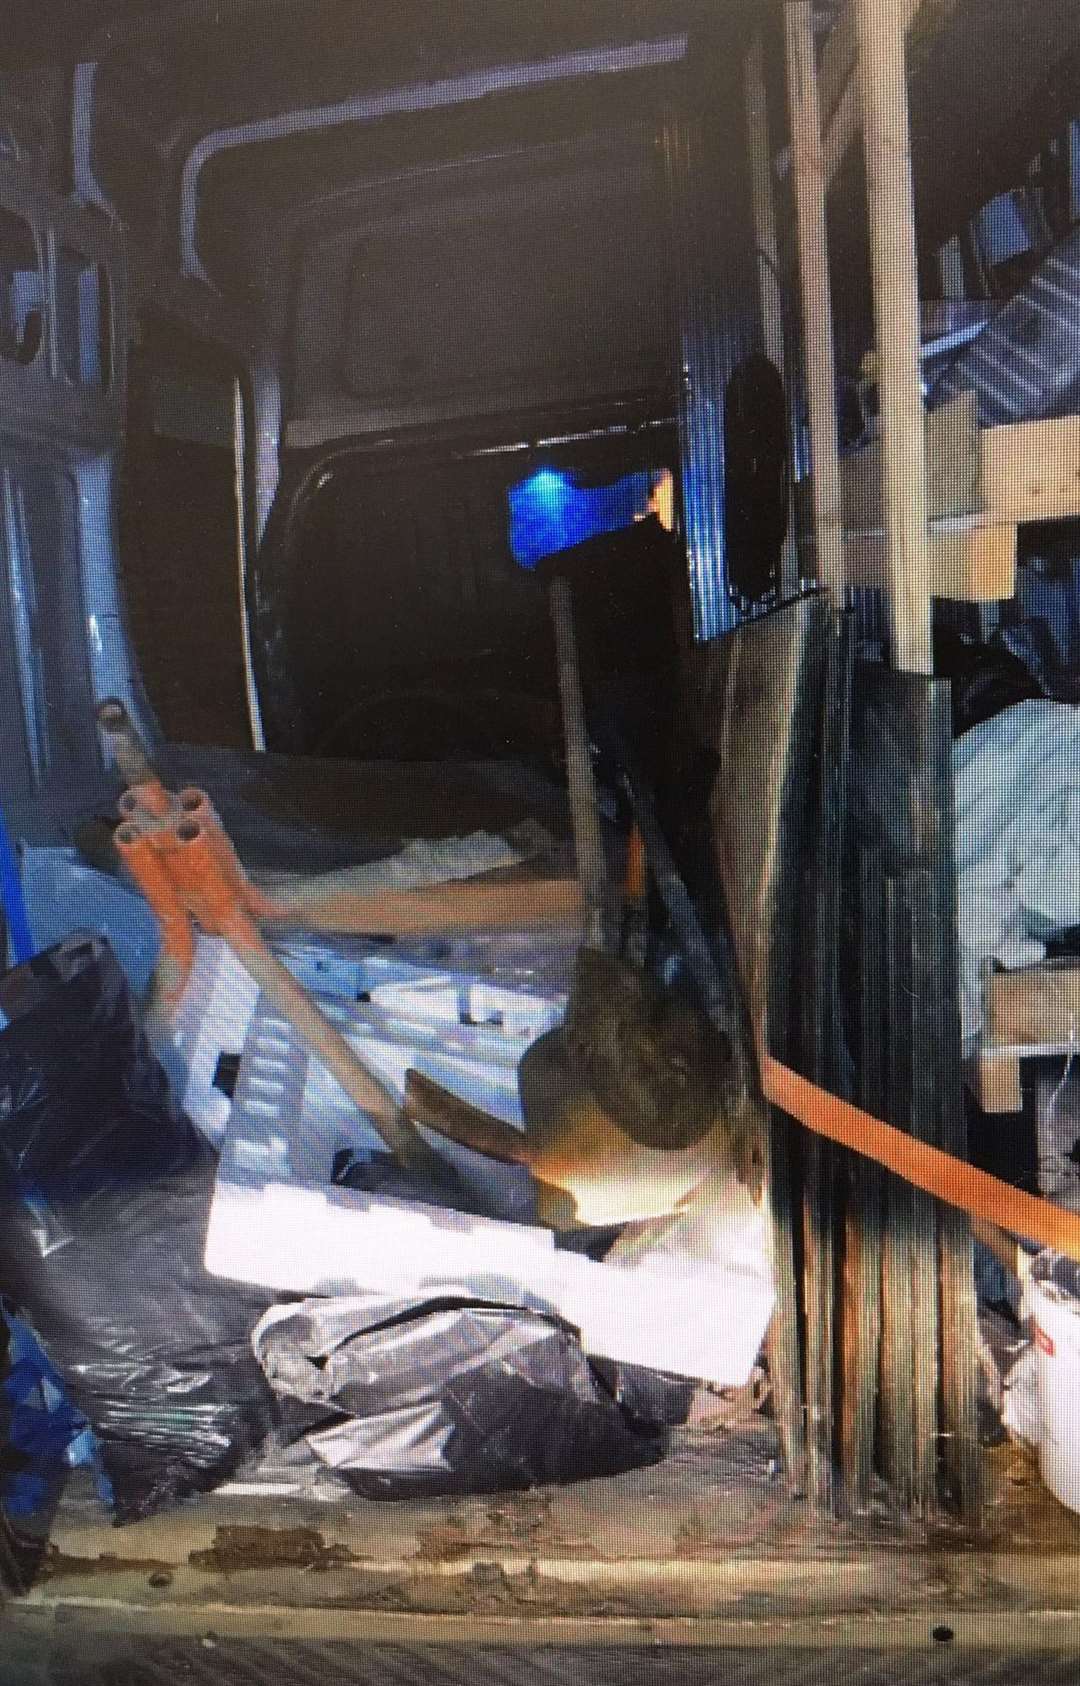 Vans were seized by police during a crackdown on fly-tipping in Maidstone (5428979)